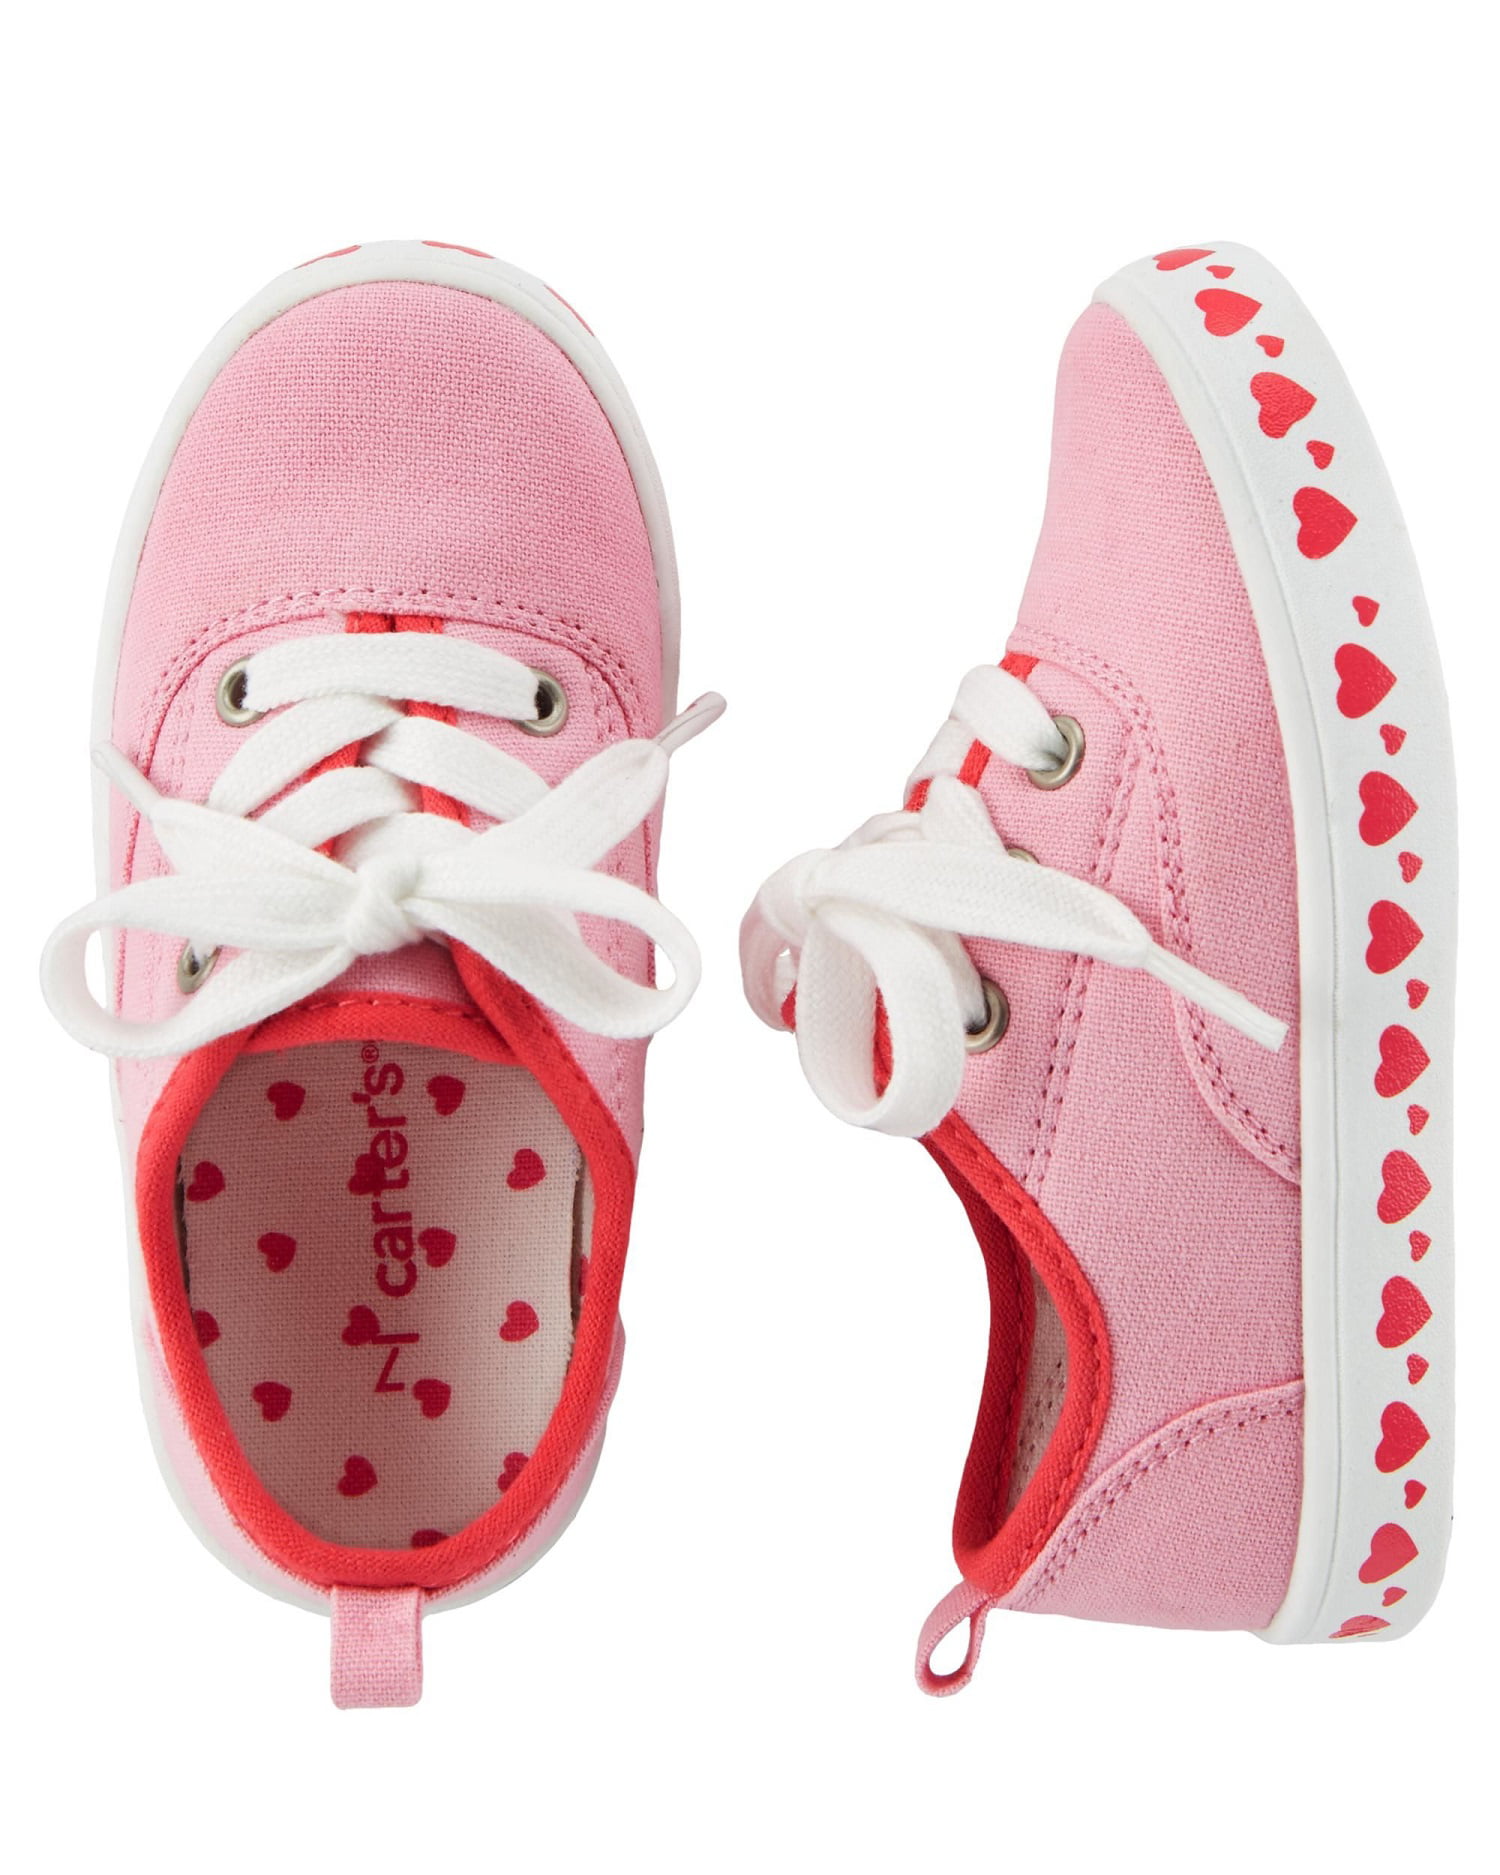 Girls' Casual Sneakers, Pink Hearts 